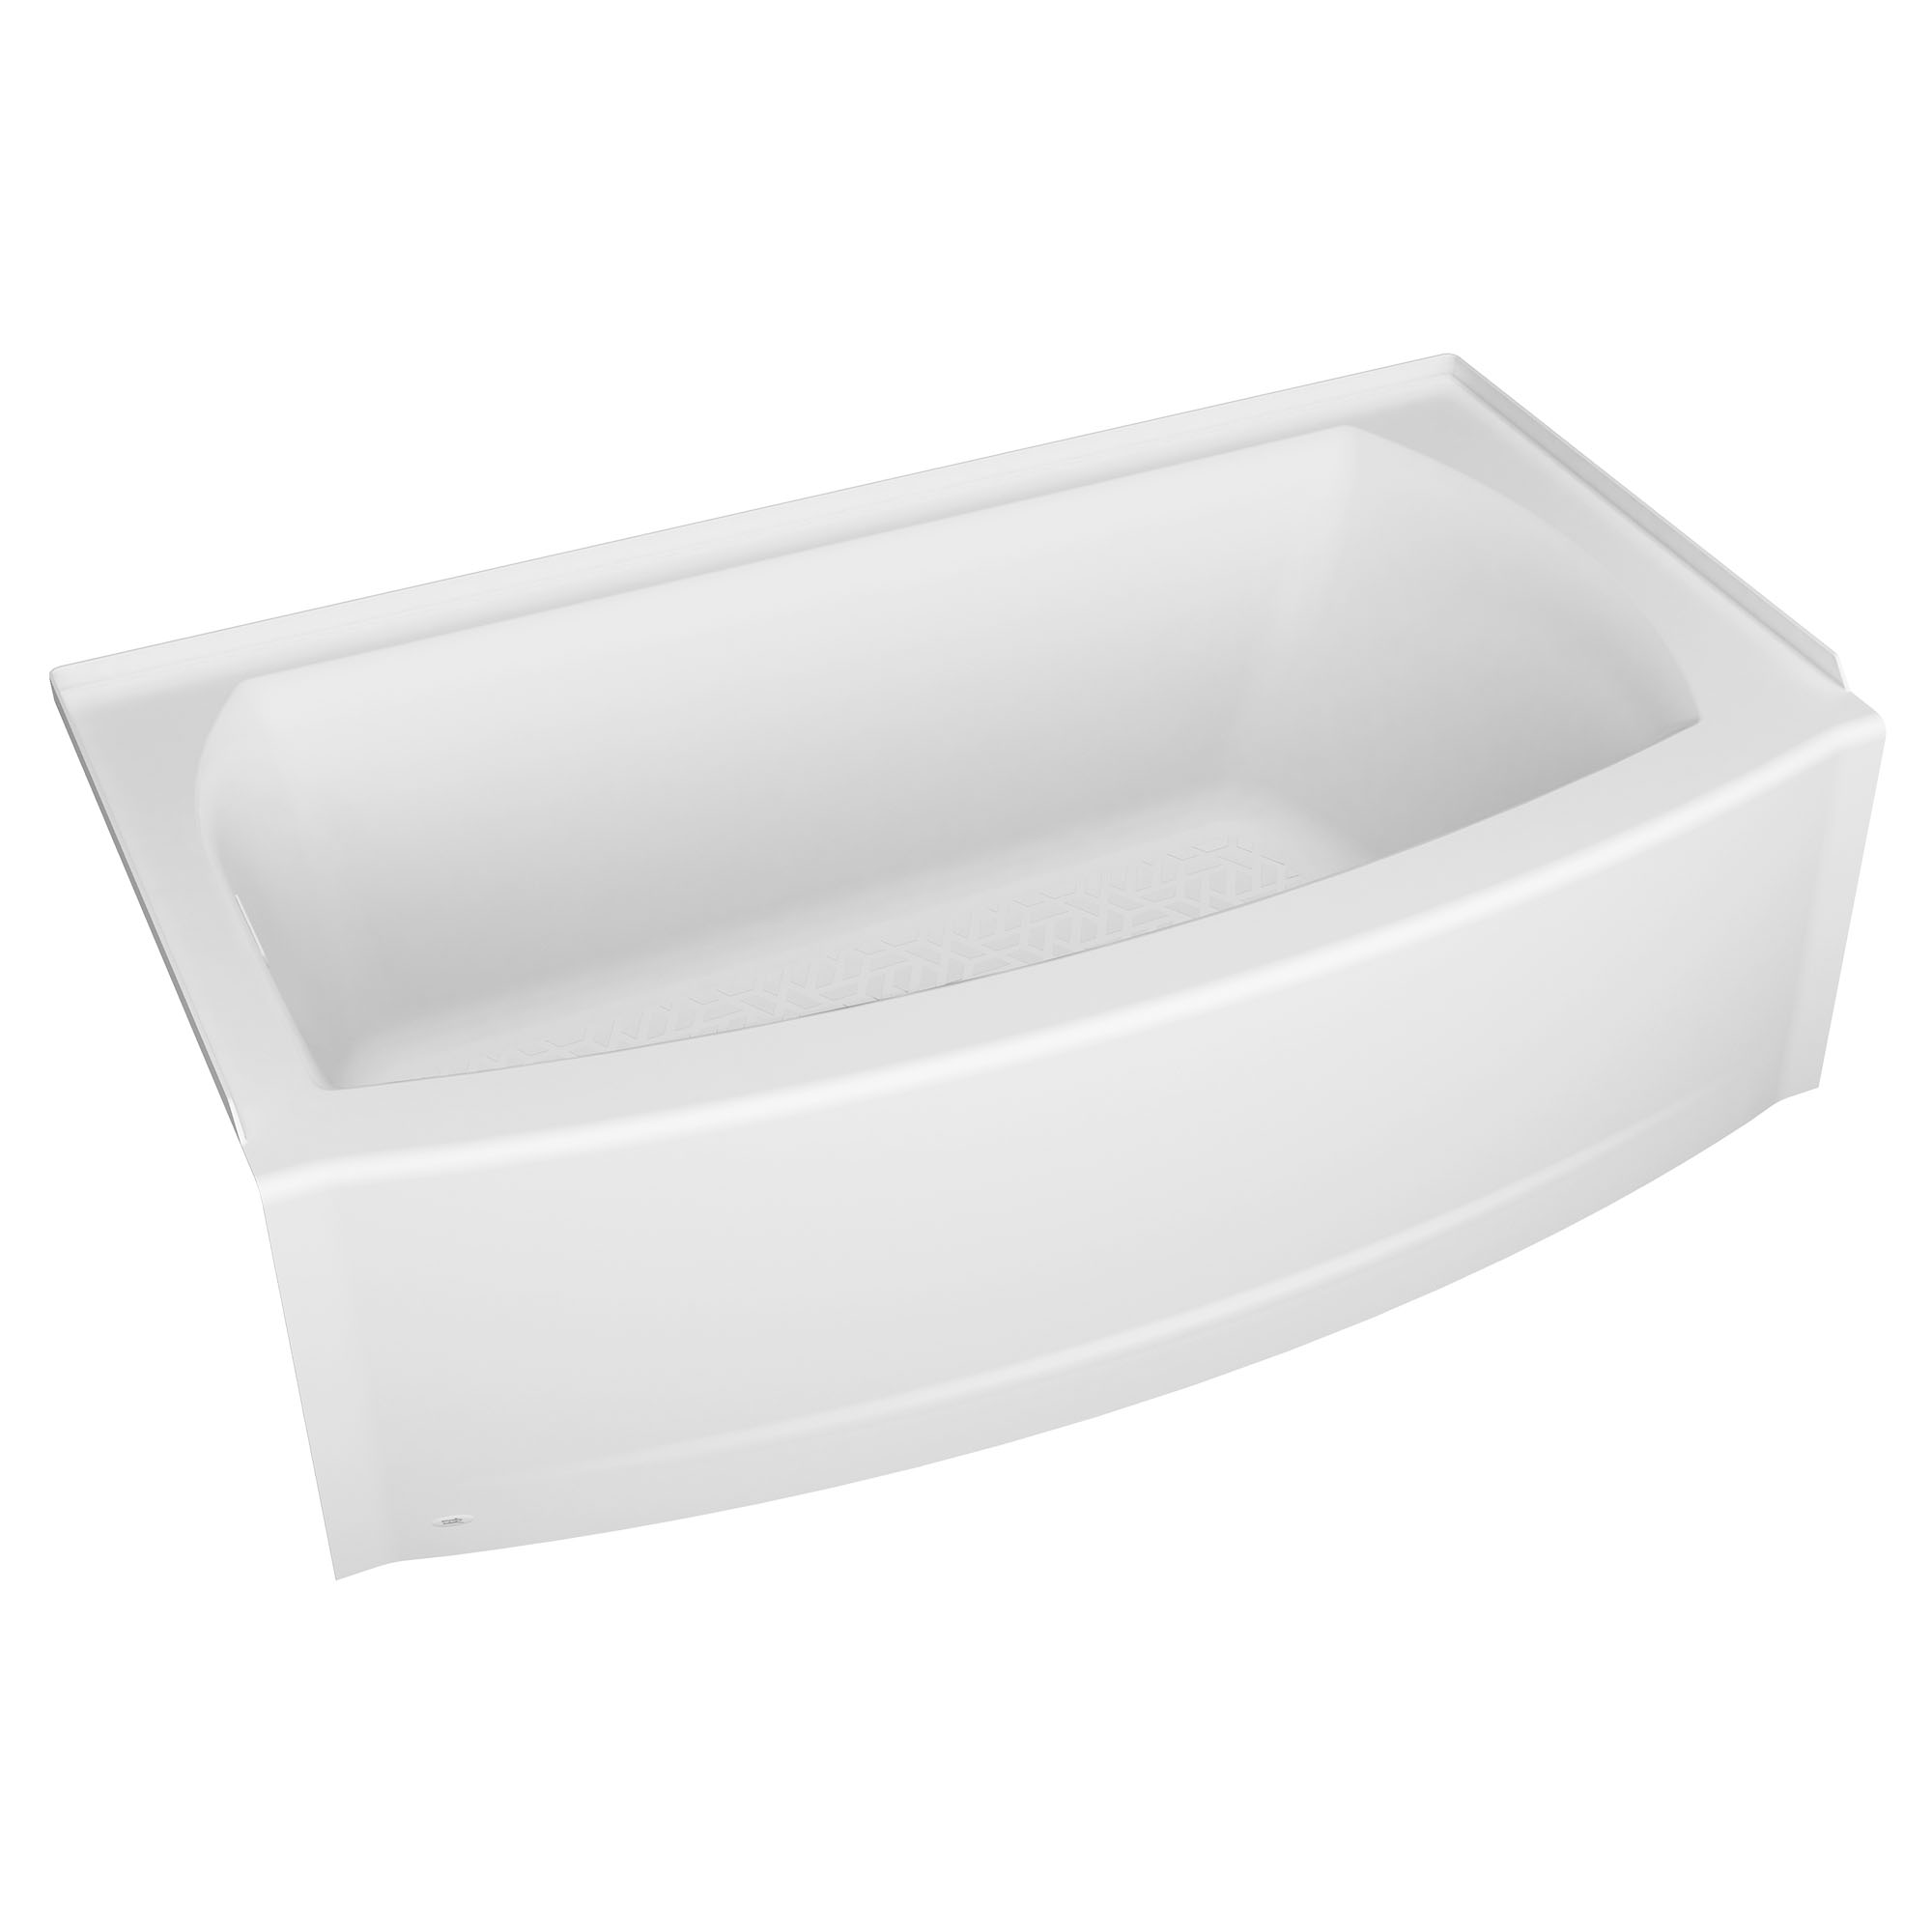 Ovation Curve™ 5x30-inch Integral Apron Bathtub with Left-hand